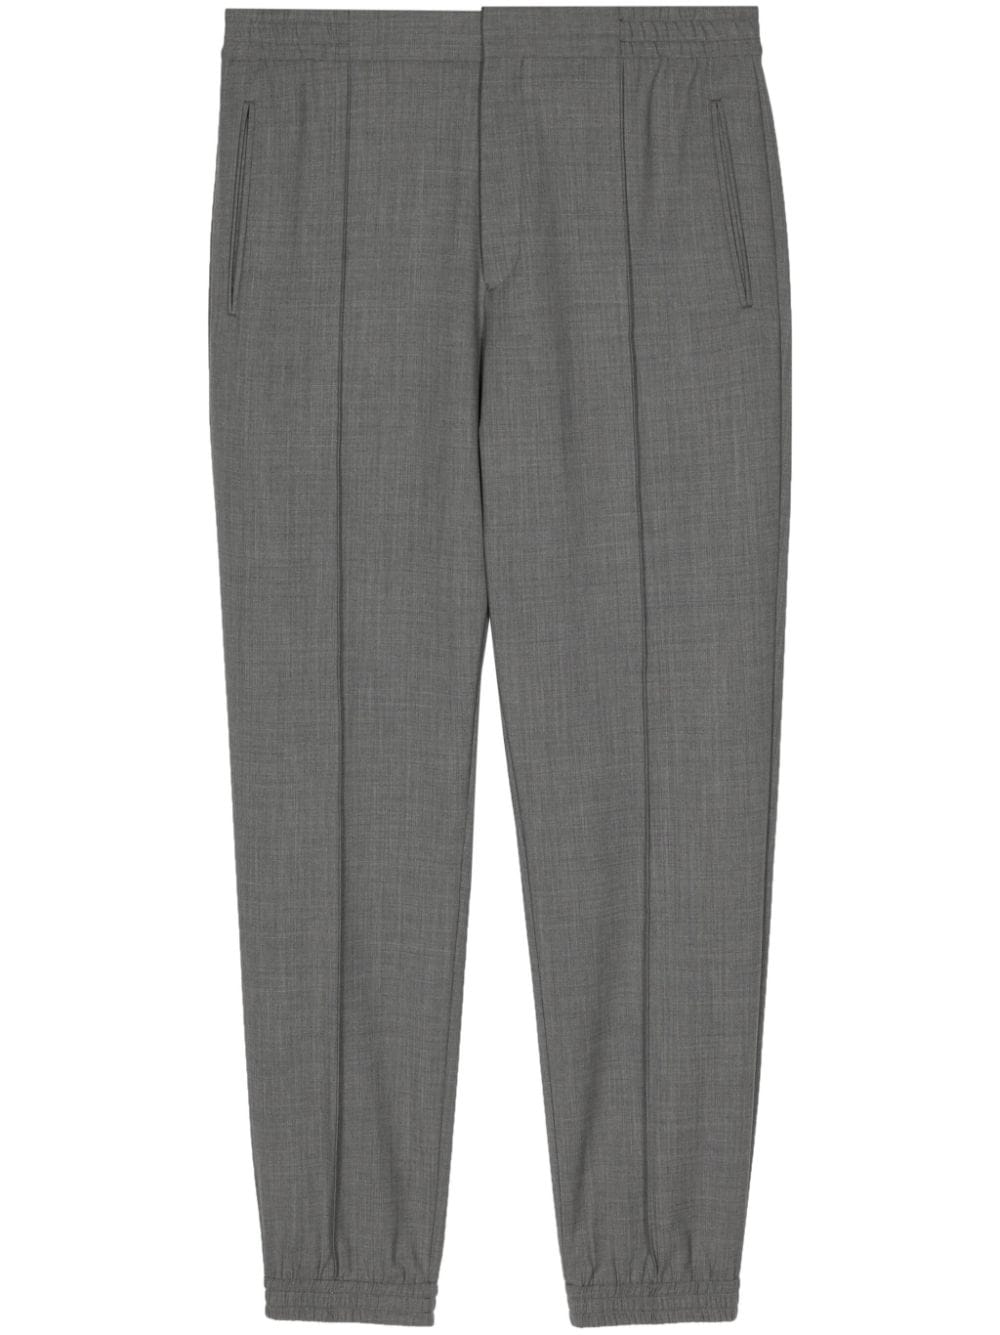 Paul Smith pleated tapered trousers - Grey von Paul Smith